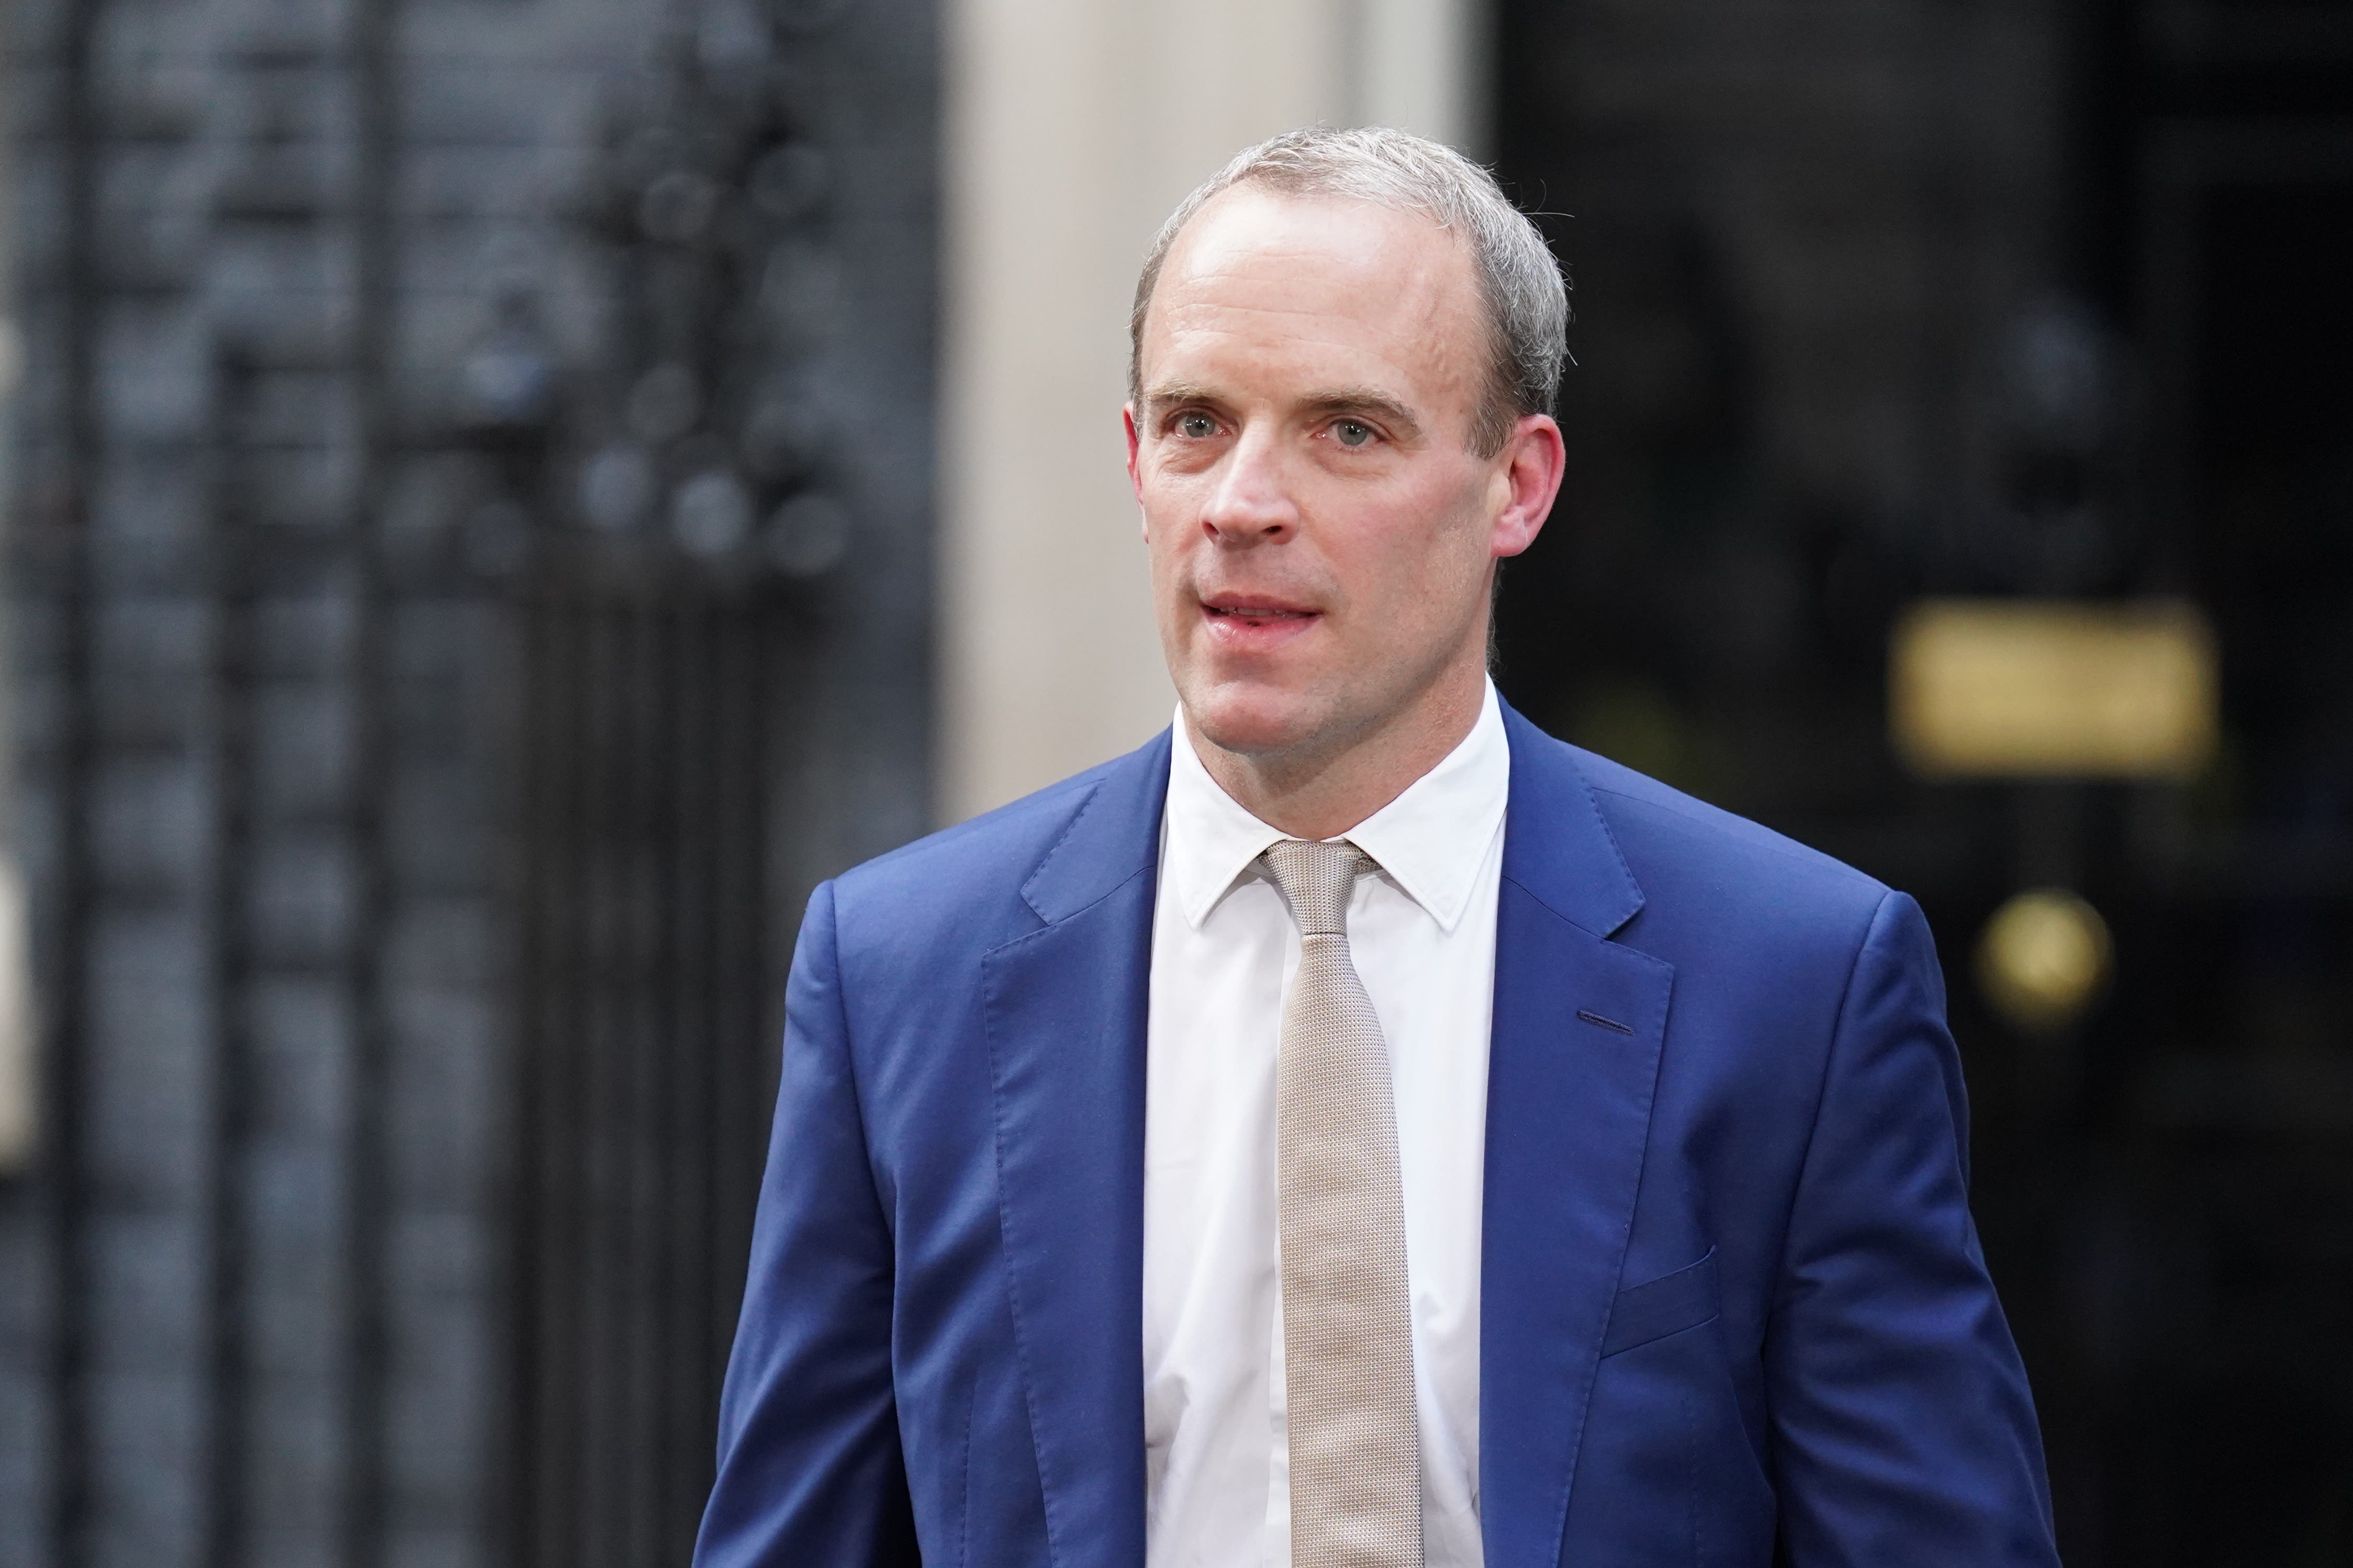 Former justice secretary Dominic Raab rejected recommendations to resentence IPP prisoners